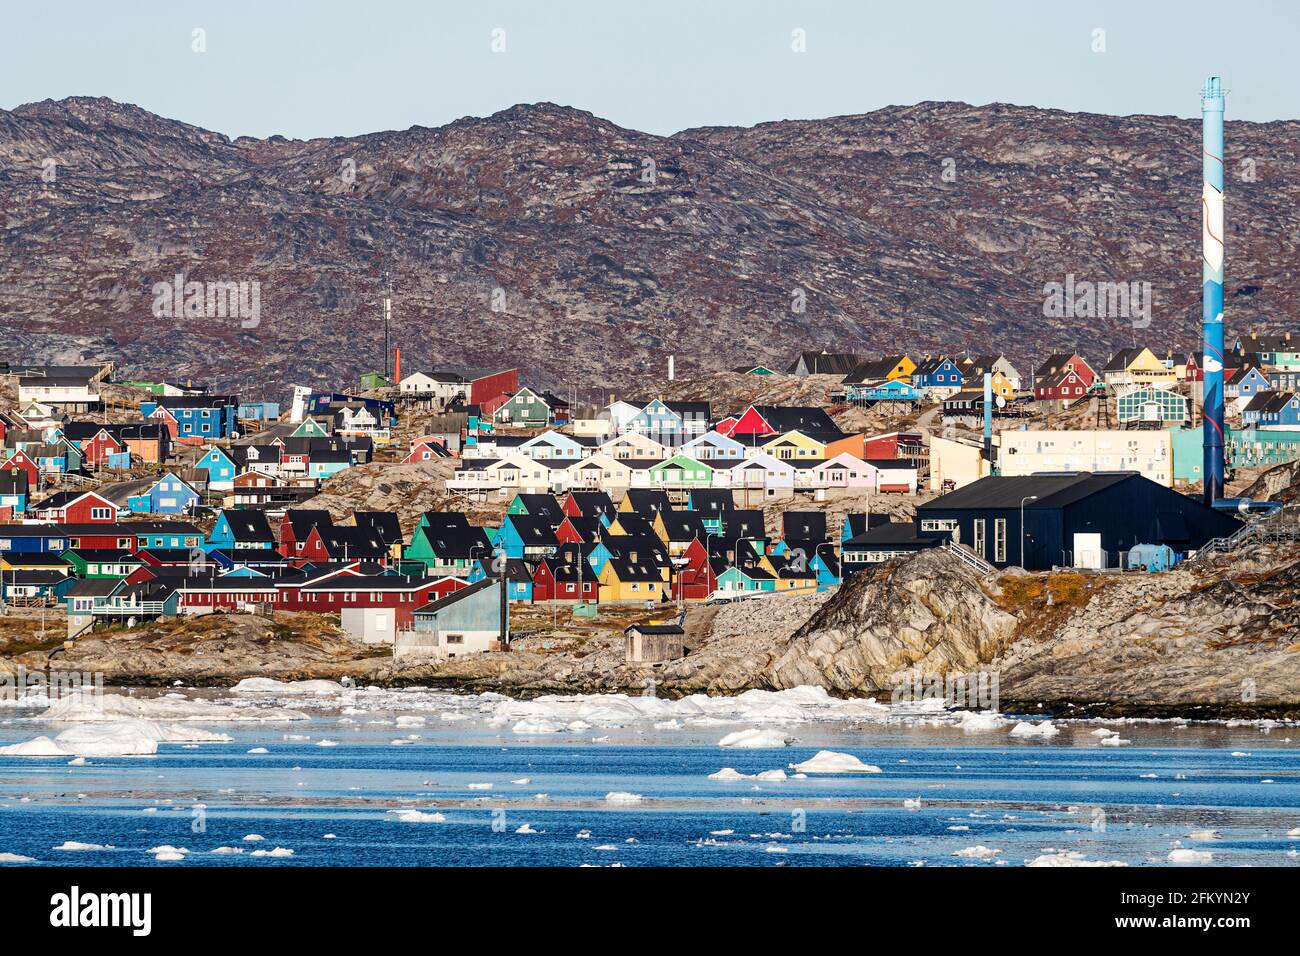 View from the outer bay of the third largest city in Greenland, Ilulissat or Jakobshavn, Greenland. Stock Photo